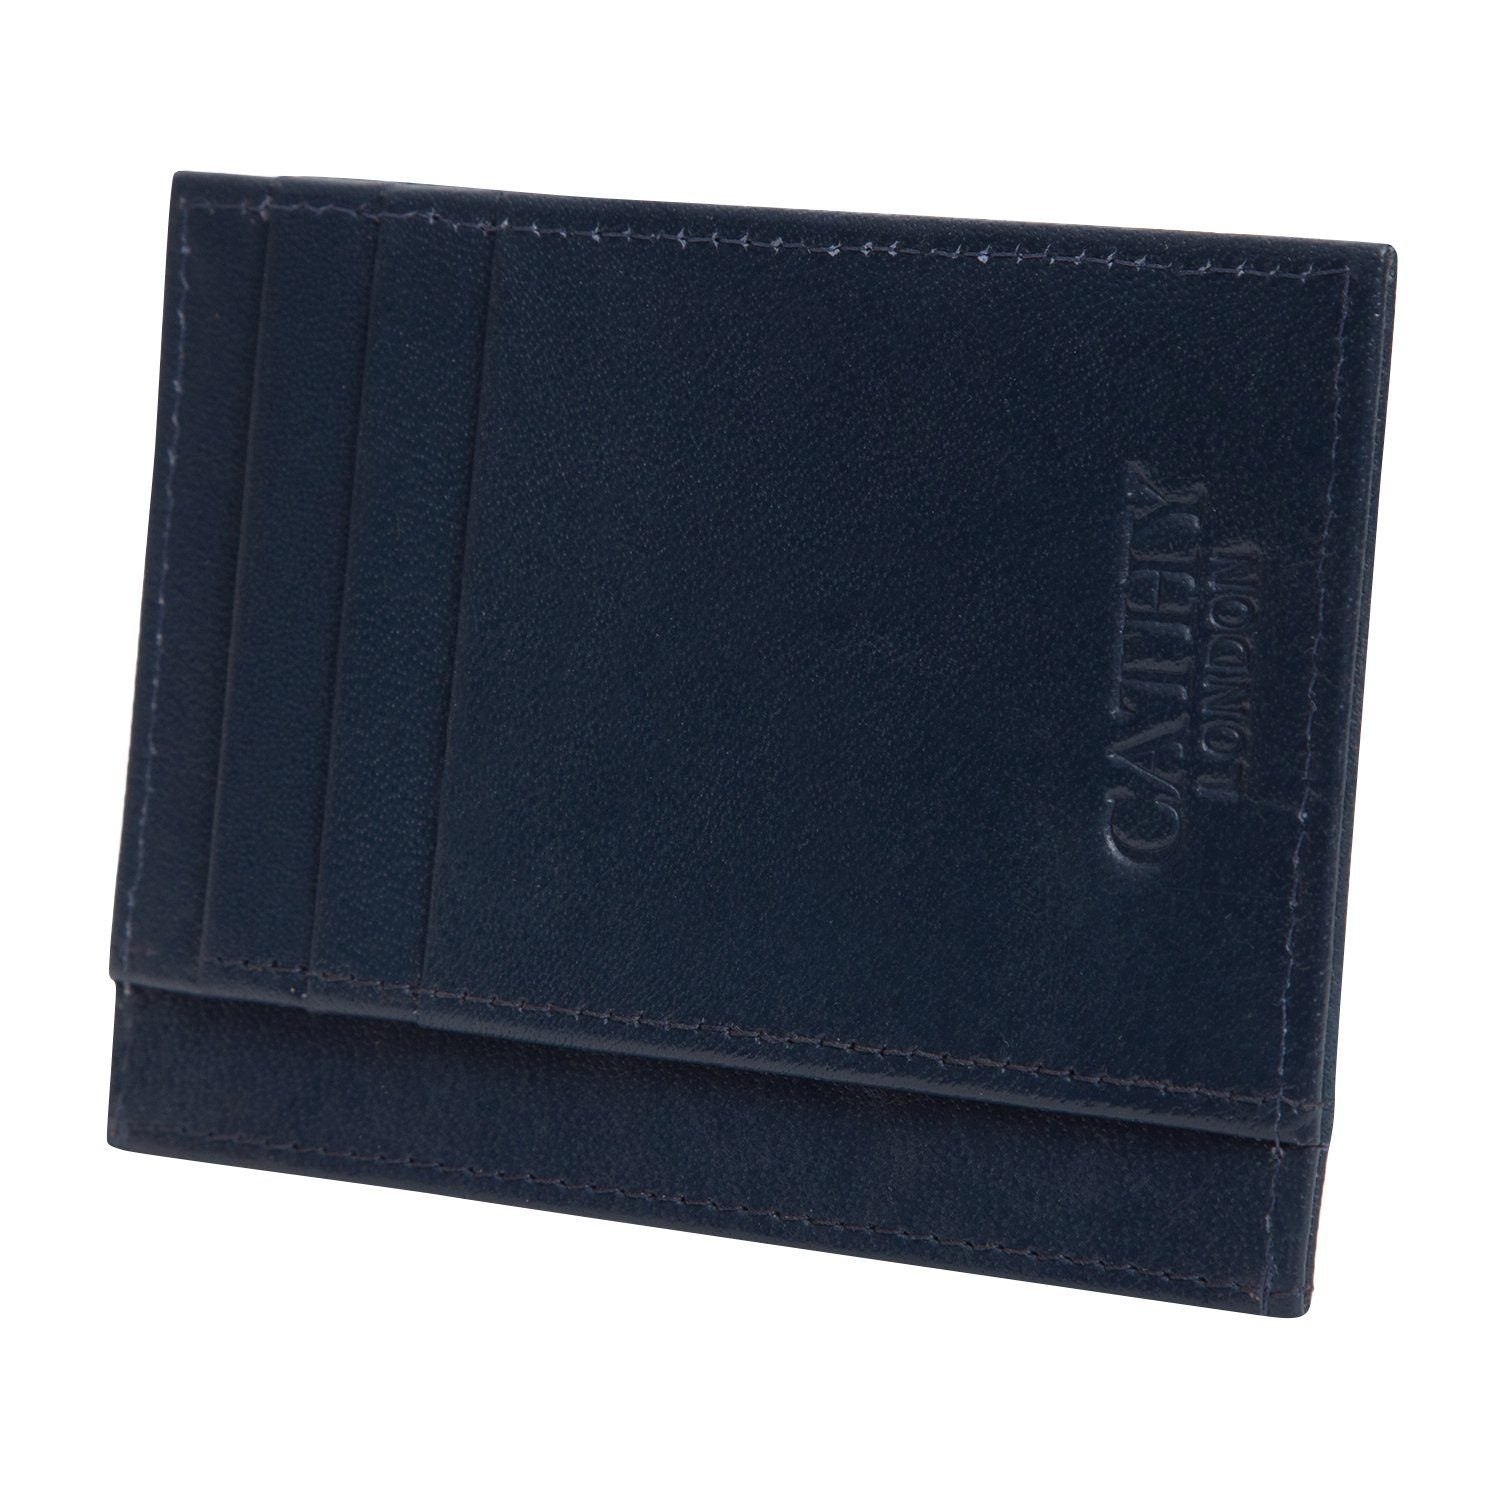 Blue Colour Italian Leather Card Holder/Slim Wallet (6 Card Slots + 1 ID Slot + Cash Compartment) Cathy London 